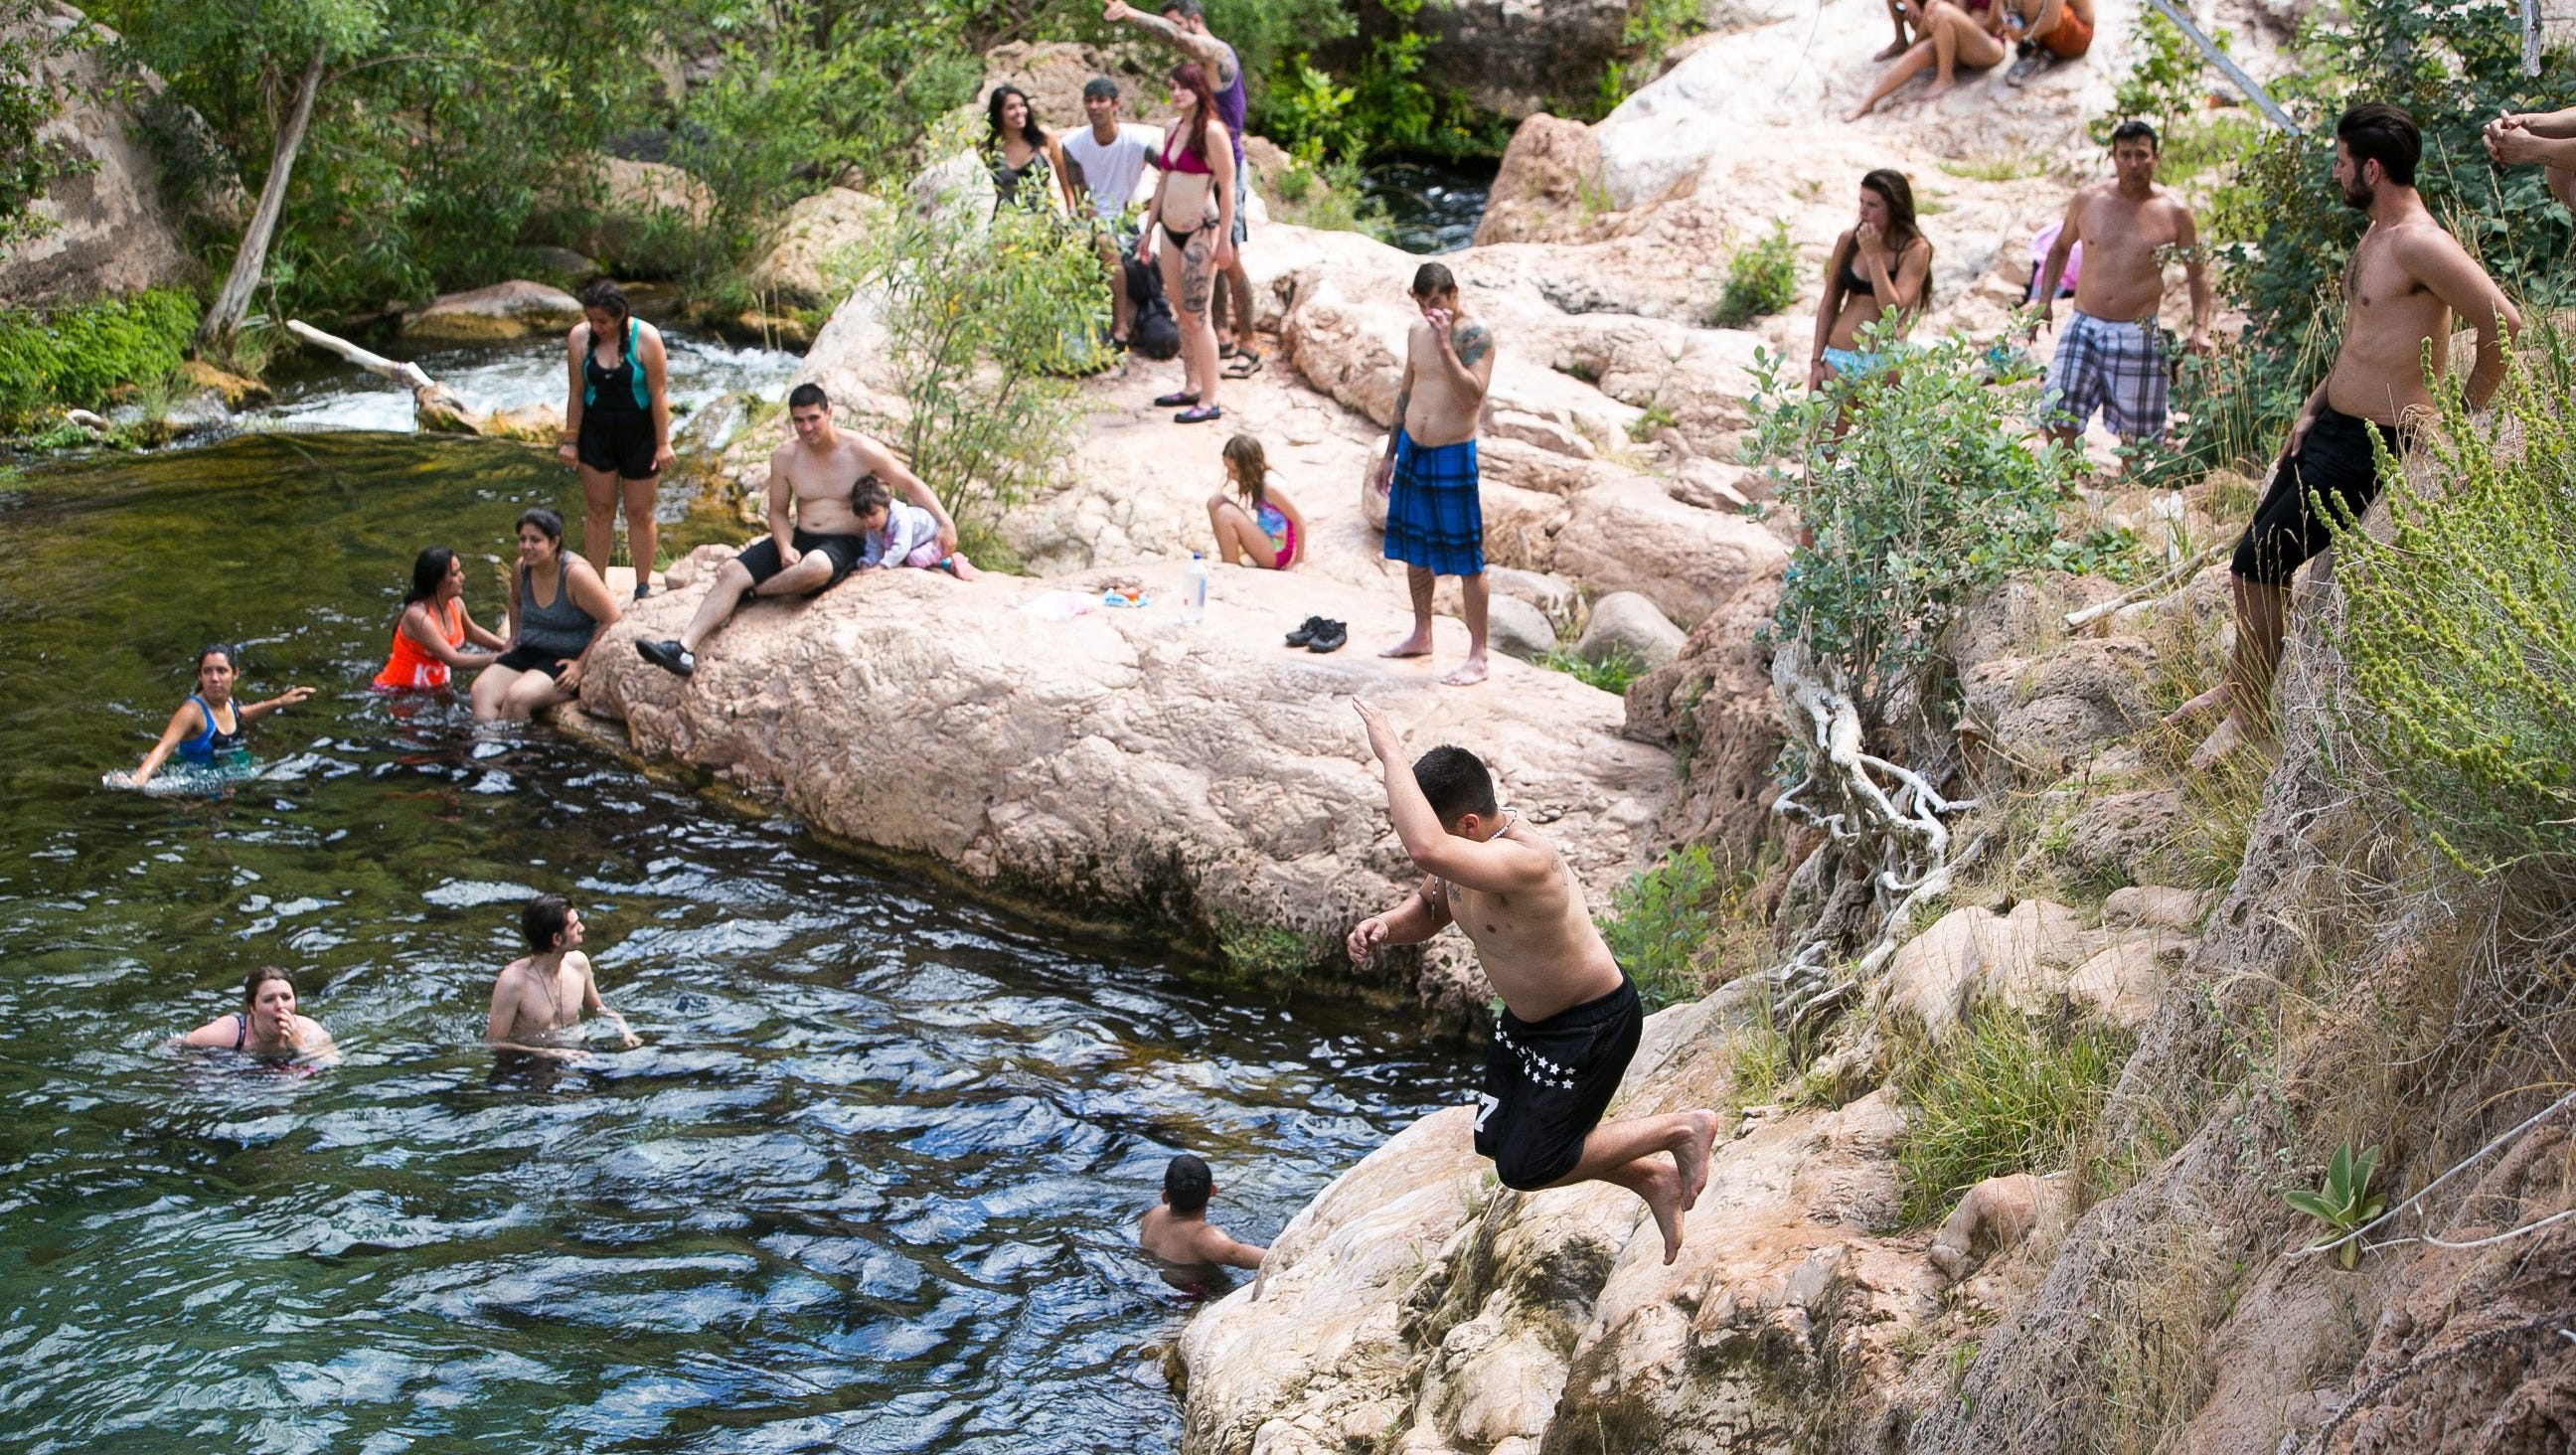 Fossil Creek reservations 2021: How to get a permit